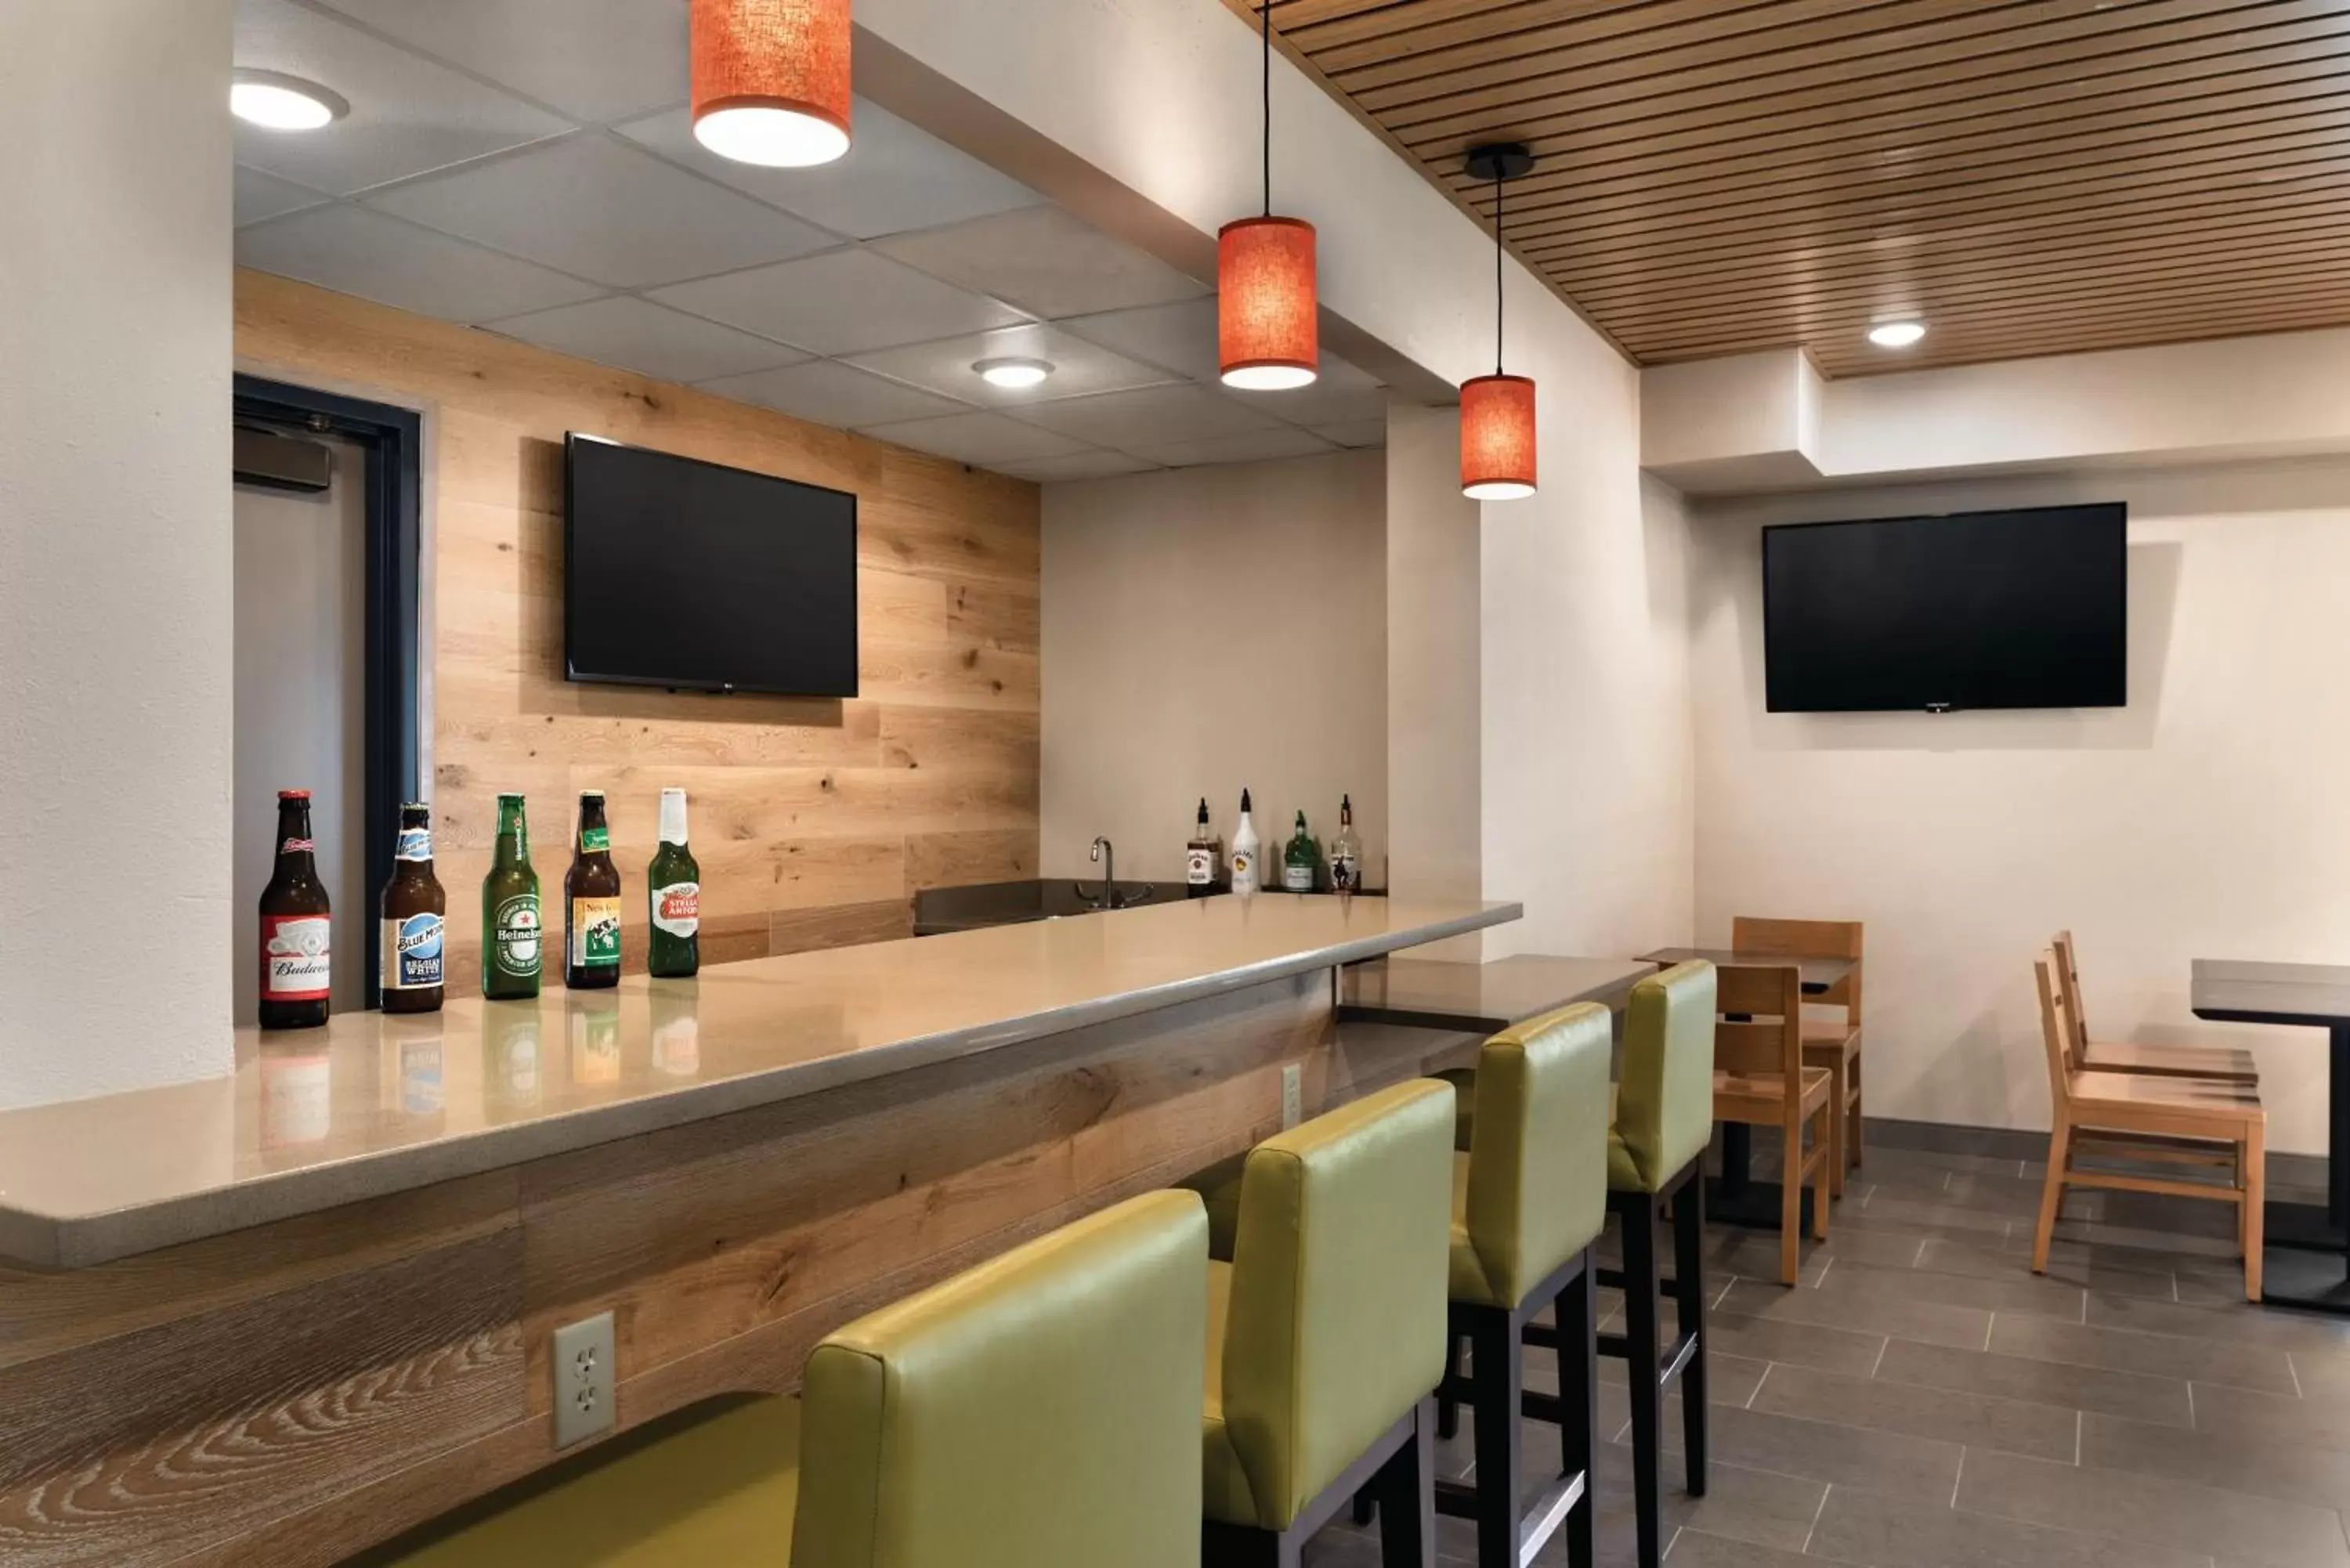 Lounge/Bar in Country Inn & Suites by Radisson, La Crosse, WI